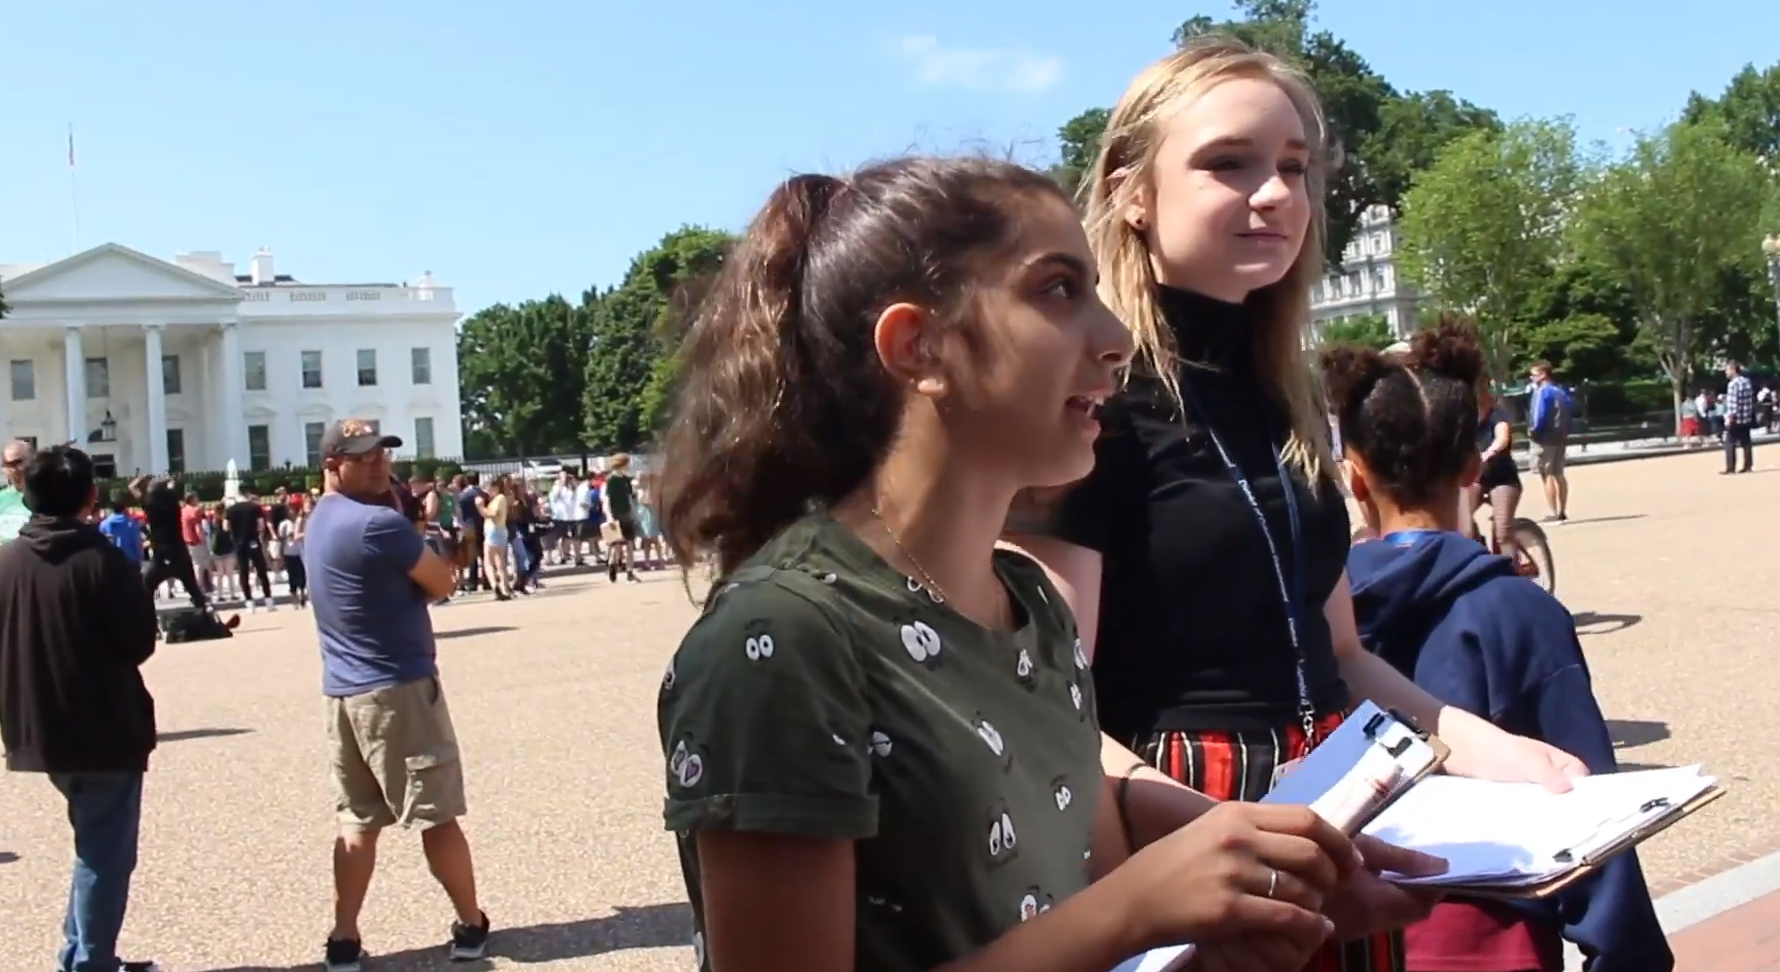 Two students interview passersby about the global issues their poems center on. Image by Kayla Sharpe. United States, 2018.